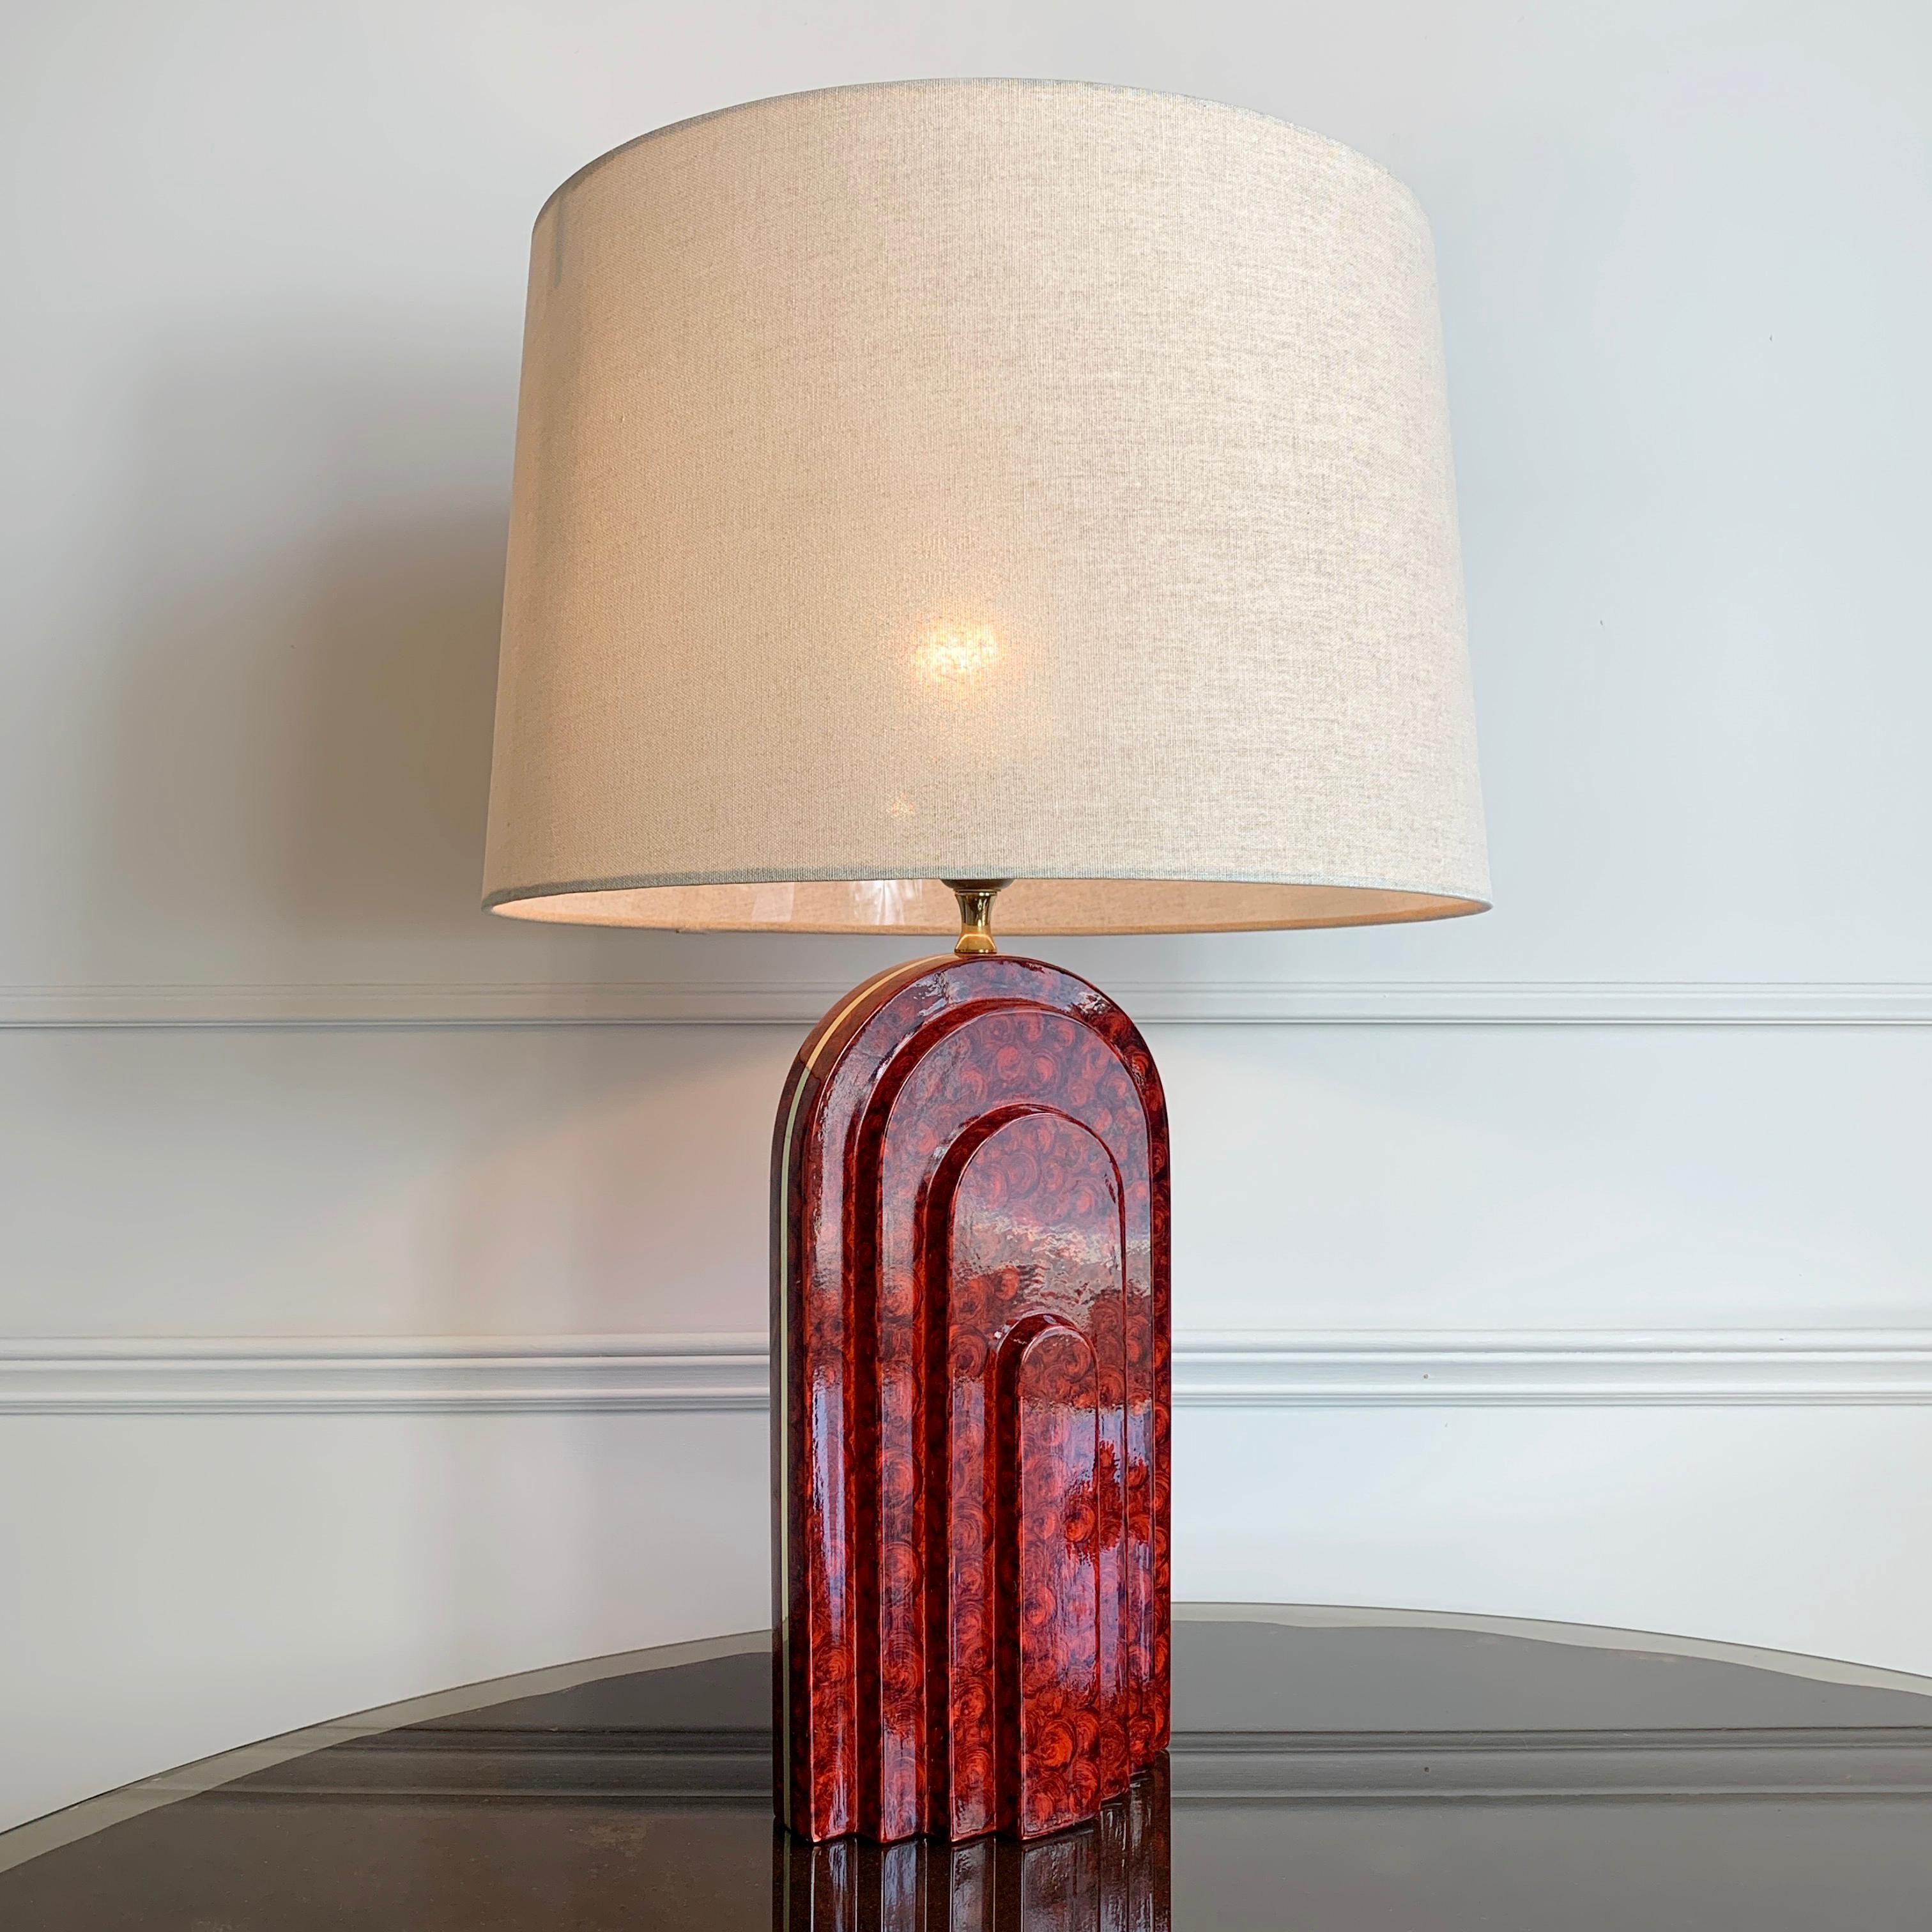 A superb 1980's Deco style Italian table lamp, in ceramic with a beautiful crimson tortoiseshell glaze and gilt band to the shoulder and sides, fitted with a new neutral shade.

This is a truly striking piece and would make a statement in any